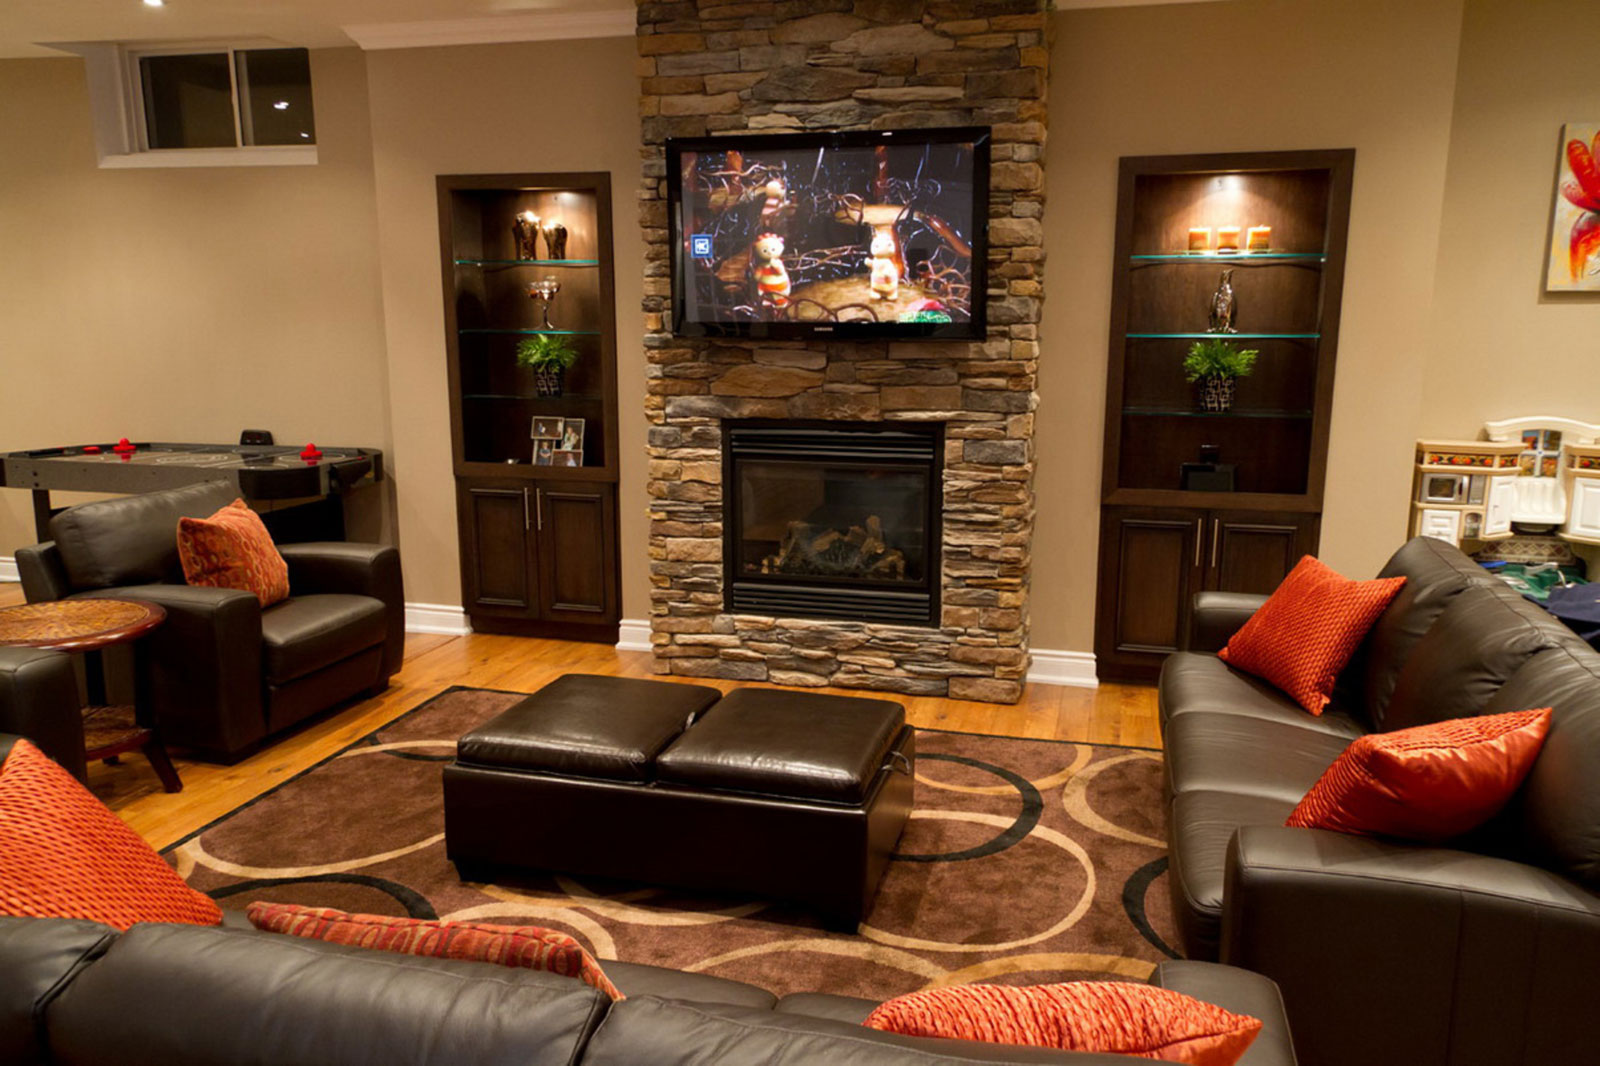 Basement Remodeling Minimalist Small Basement Remodeling Ideas With Minimalist Contemporary Living Room Using Black Leather Sofa And Stone Fireplace Design Basement Finished Basement Ideas With Decorative Style